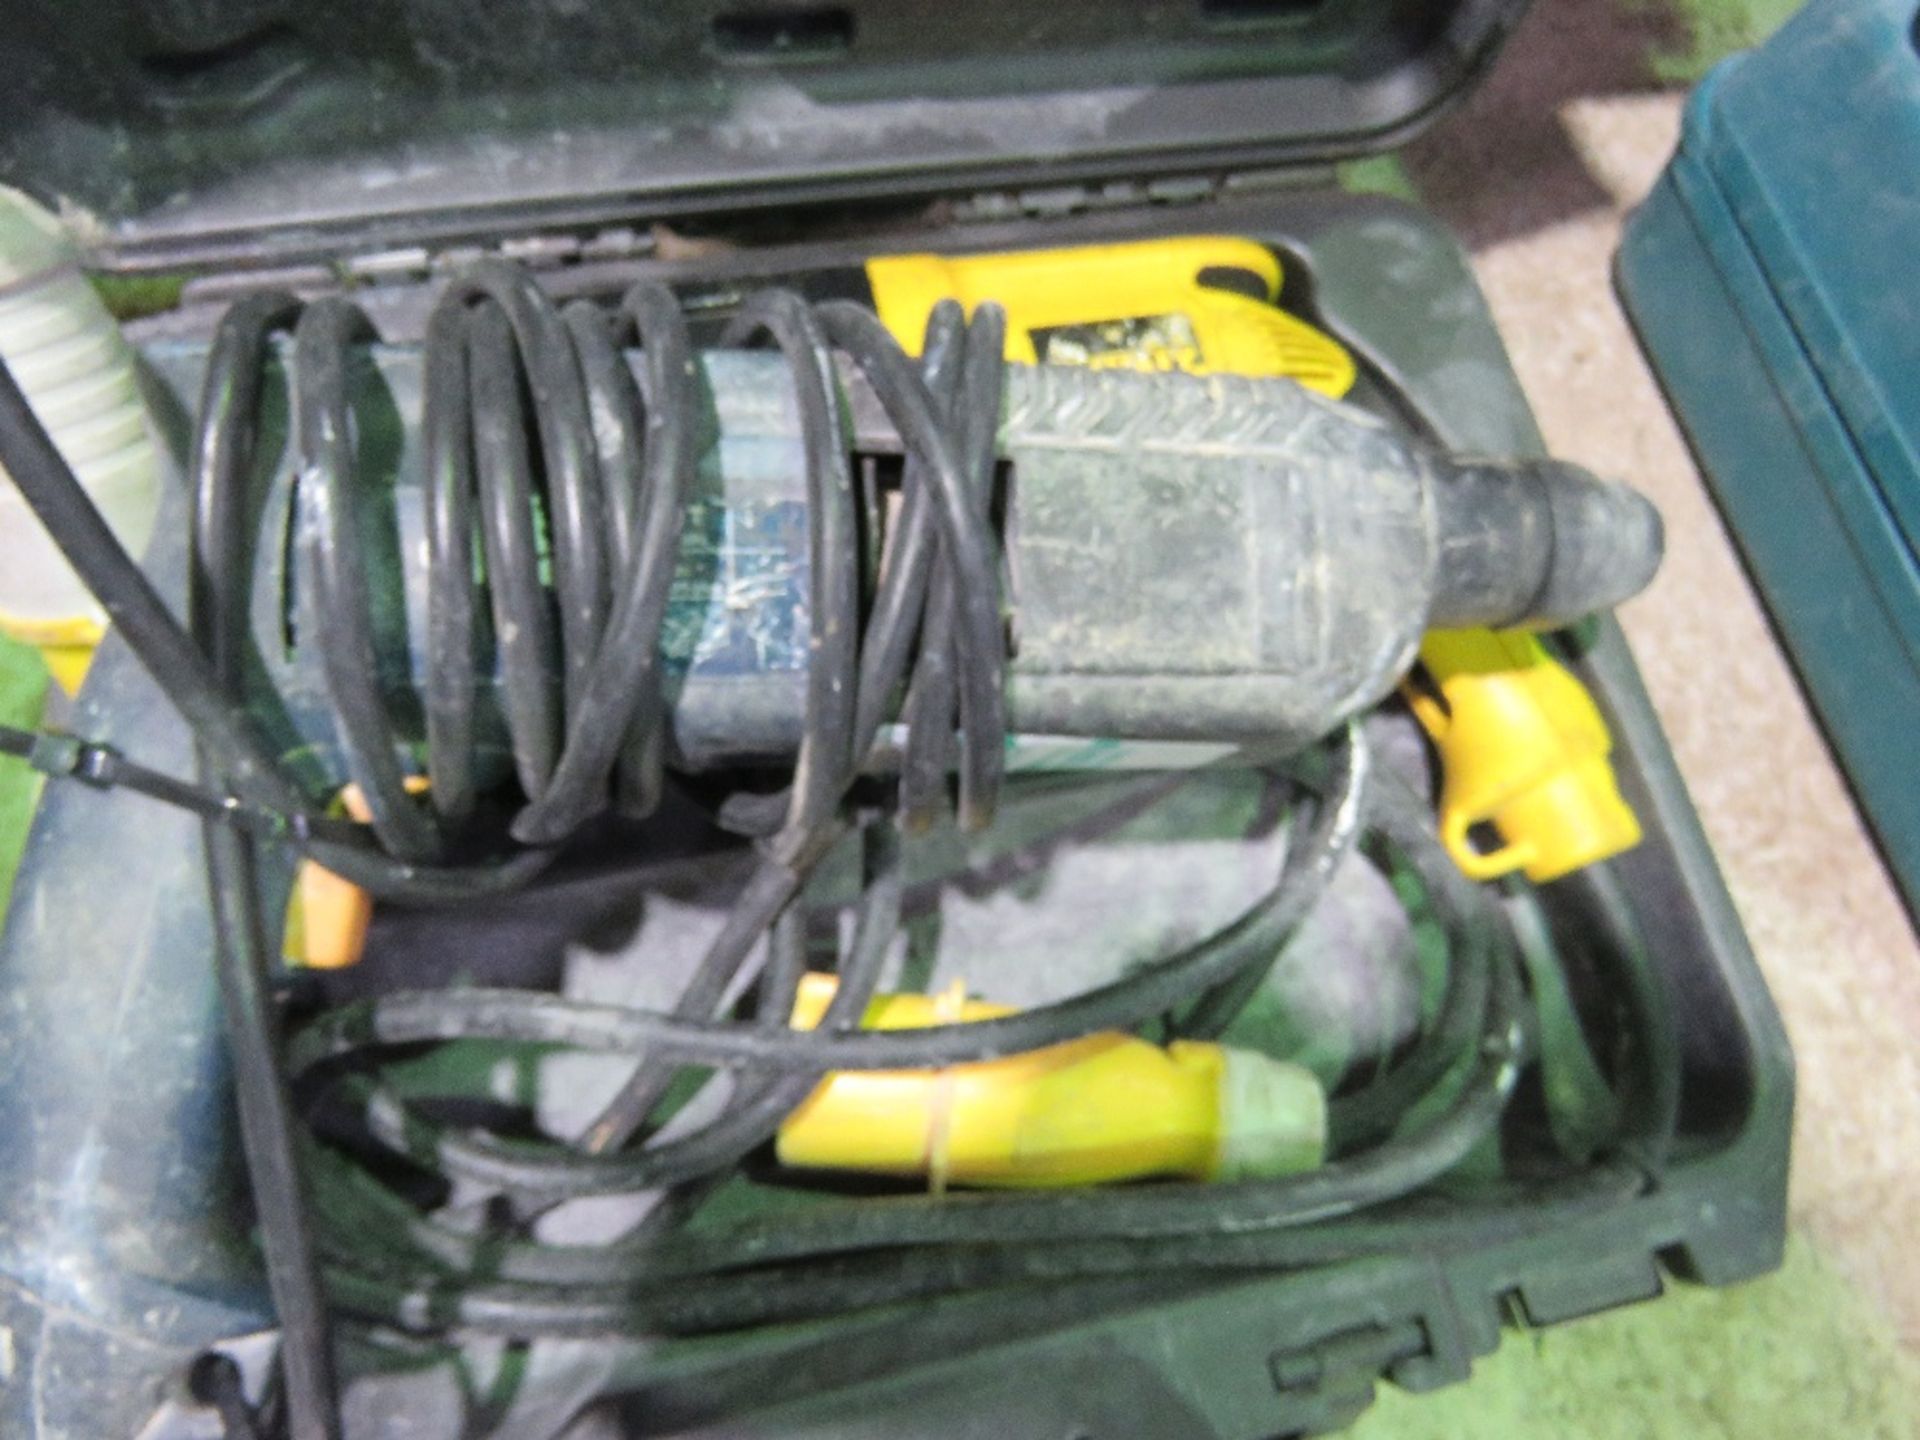 3 X POWER TOOLS: 2 X DRILLS PLUS A CIRCULAR SAW. DIRECT FROM LOCAL COMPANY. - Image 3 of 6